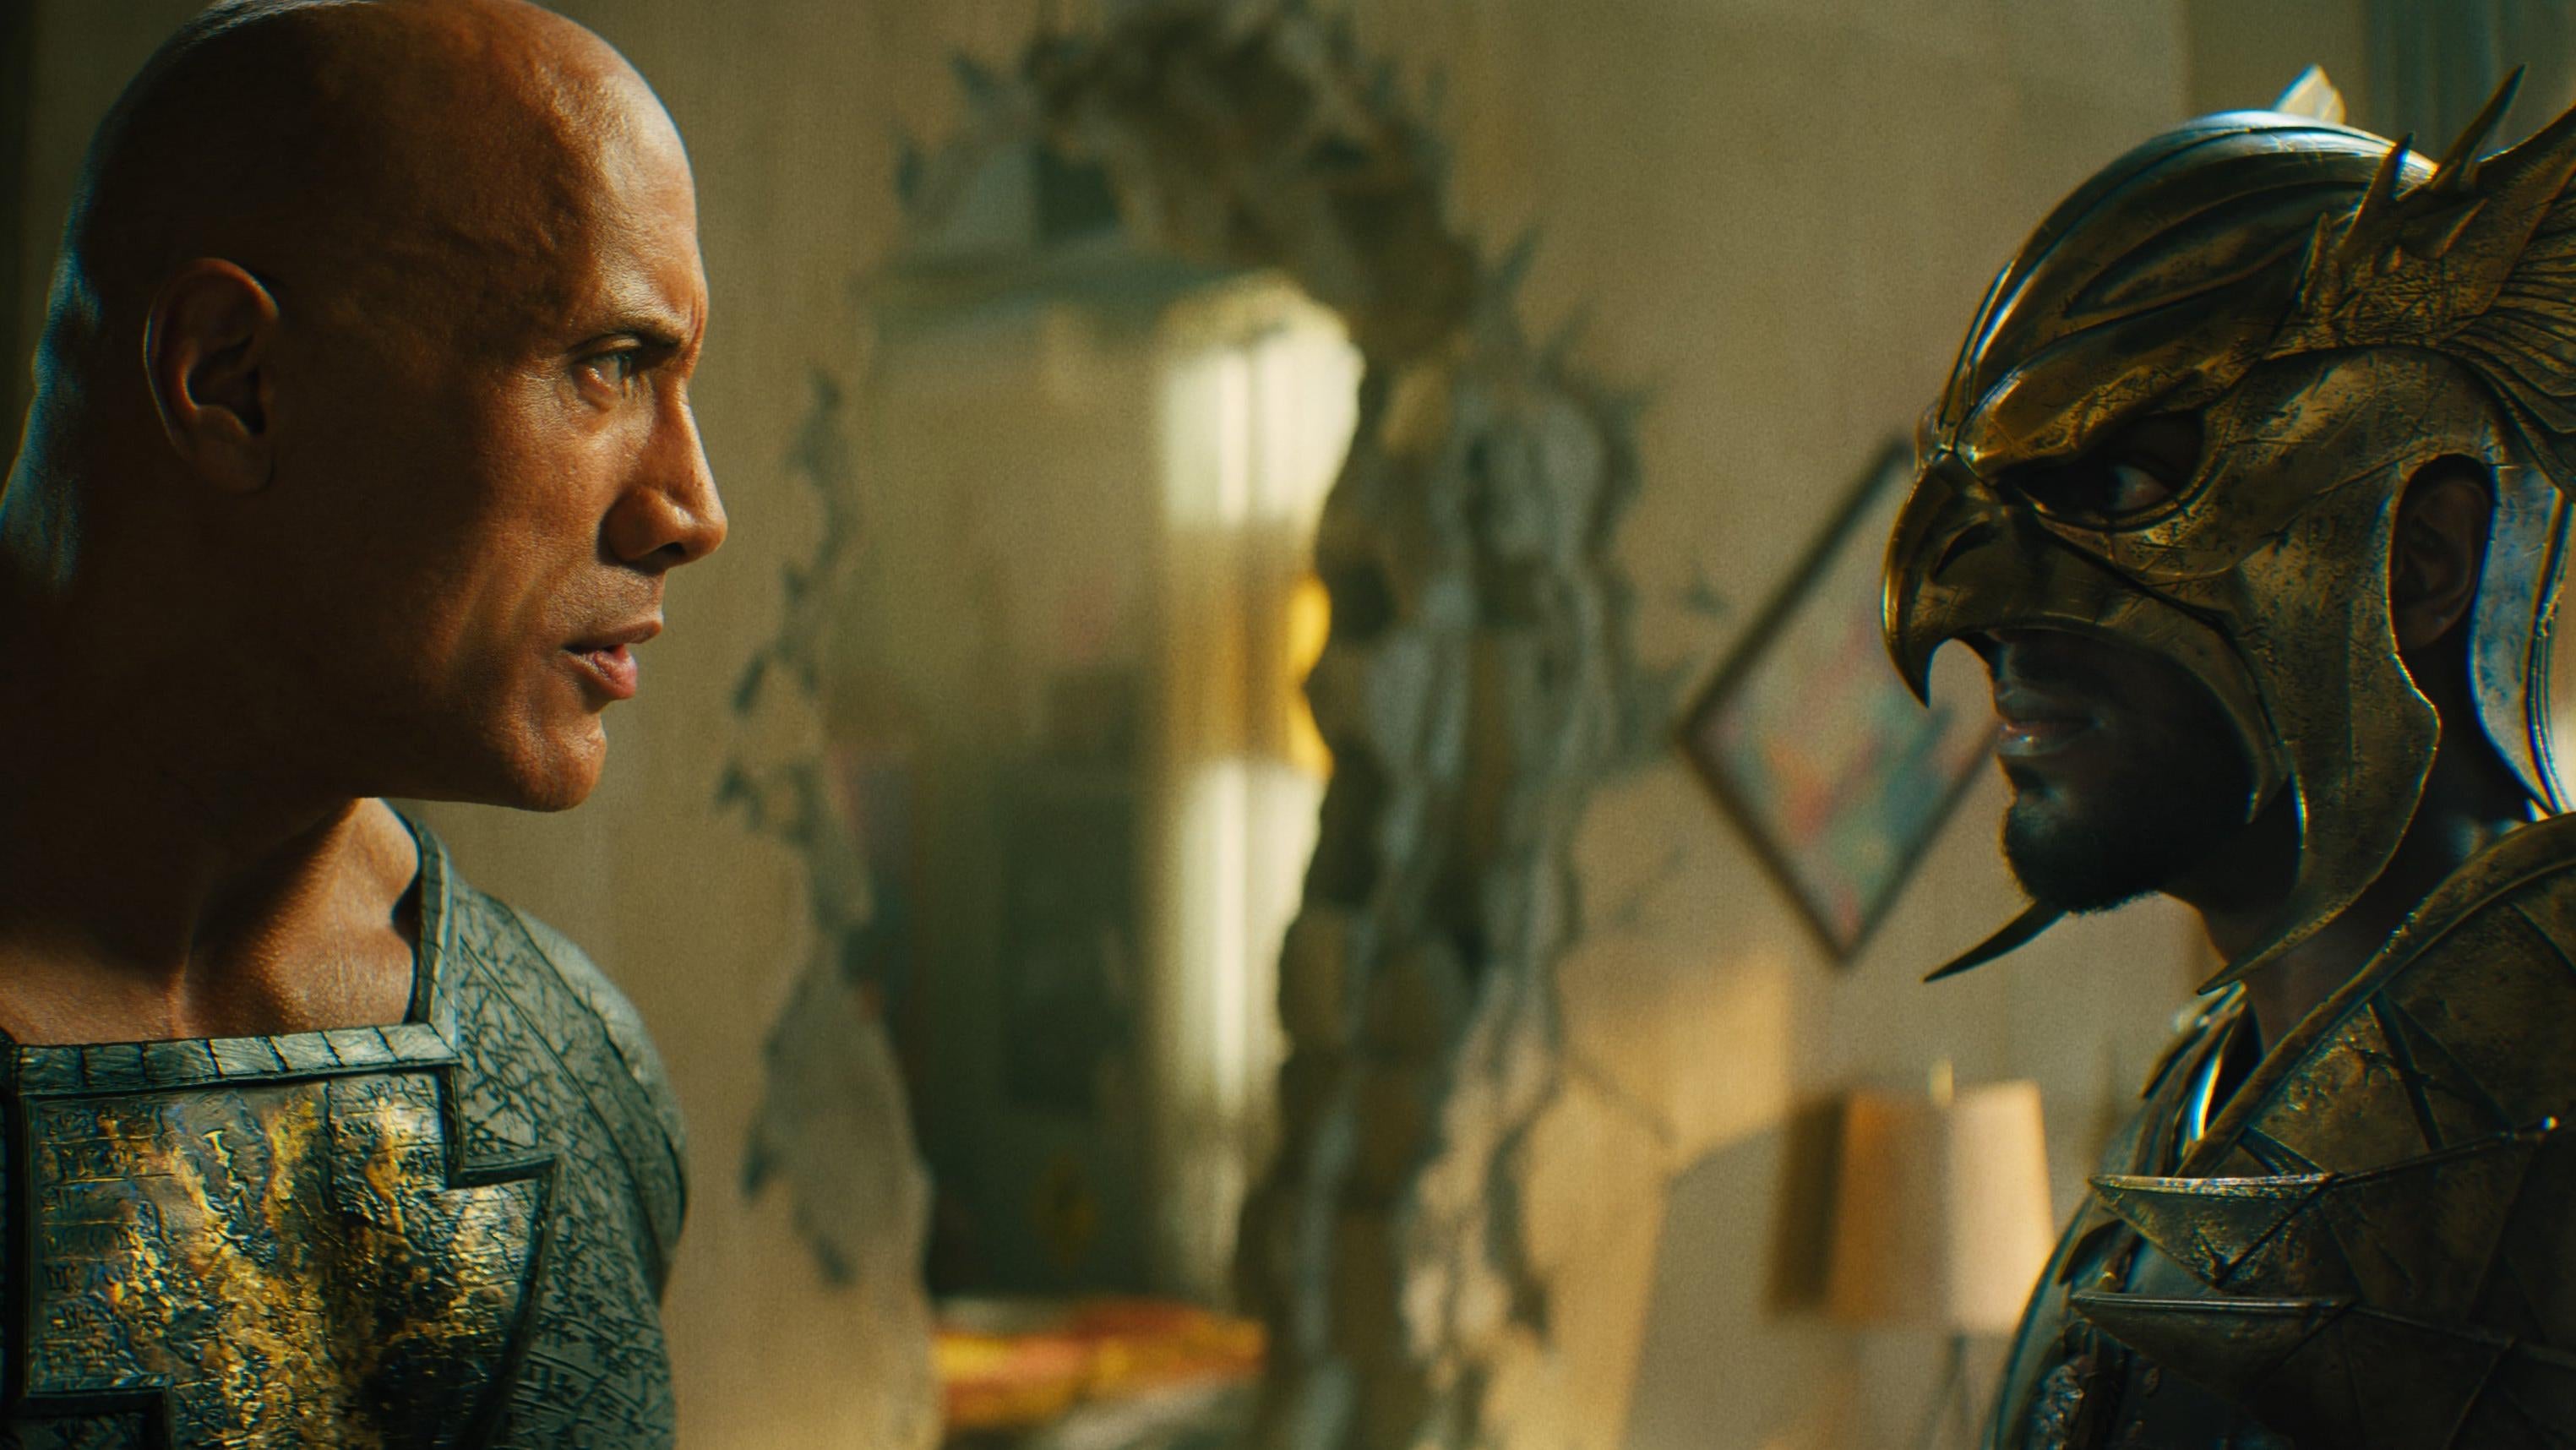 Black Adam and Hawkman have some epic fights. (Image: Warner Bros.)